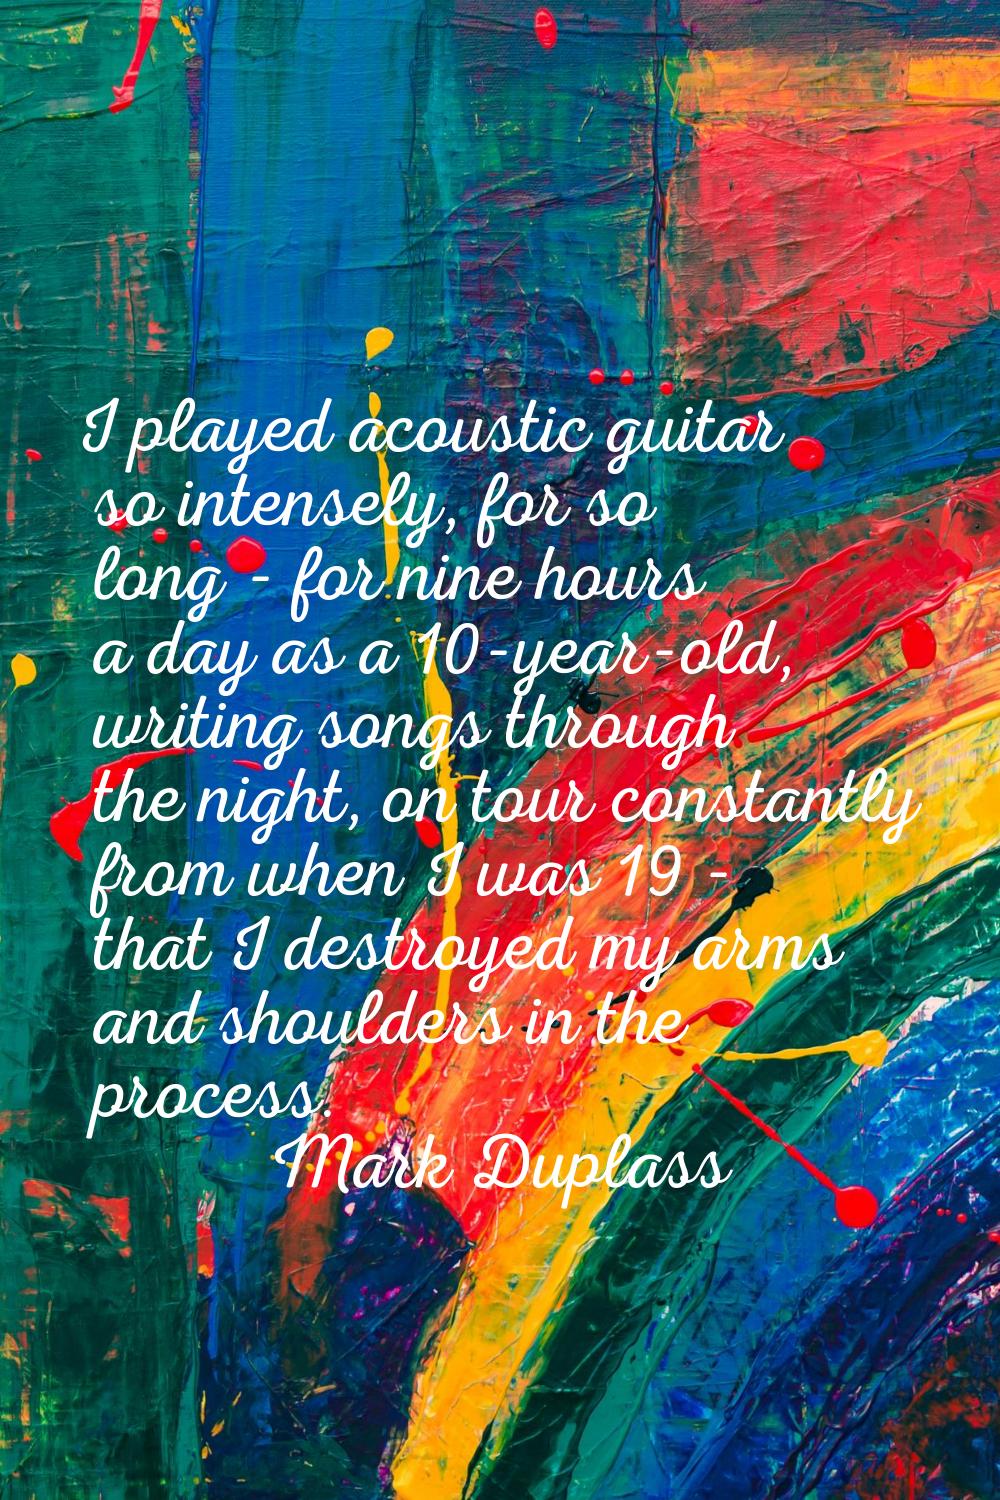 I played acoustic guitar so intensely, for so long - for nine hours a day as a 10-year-old, writing